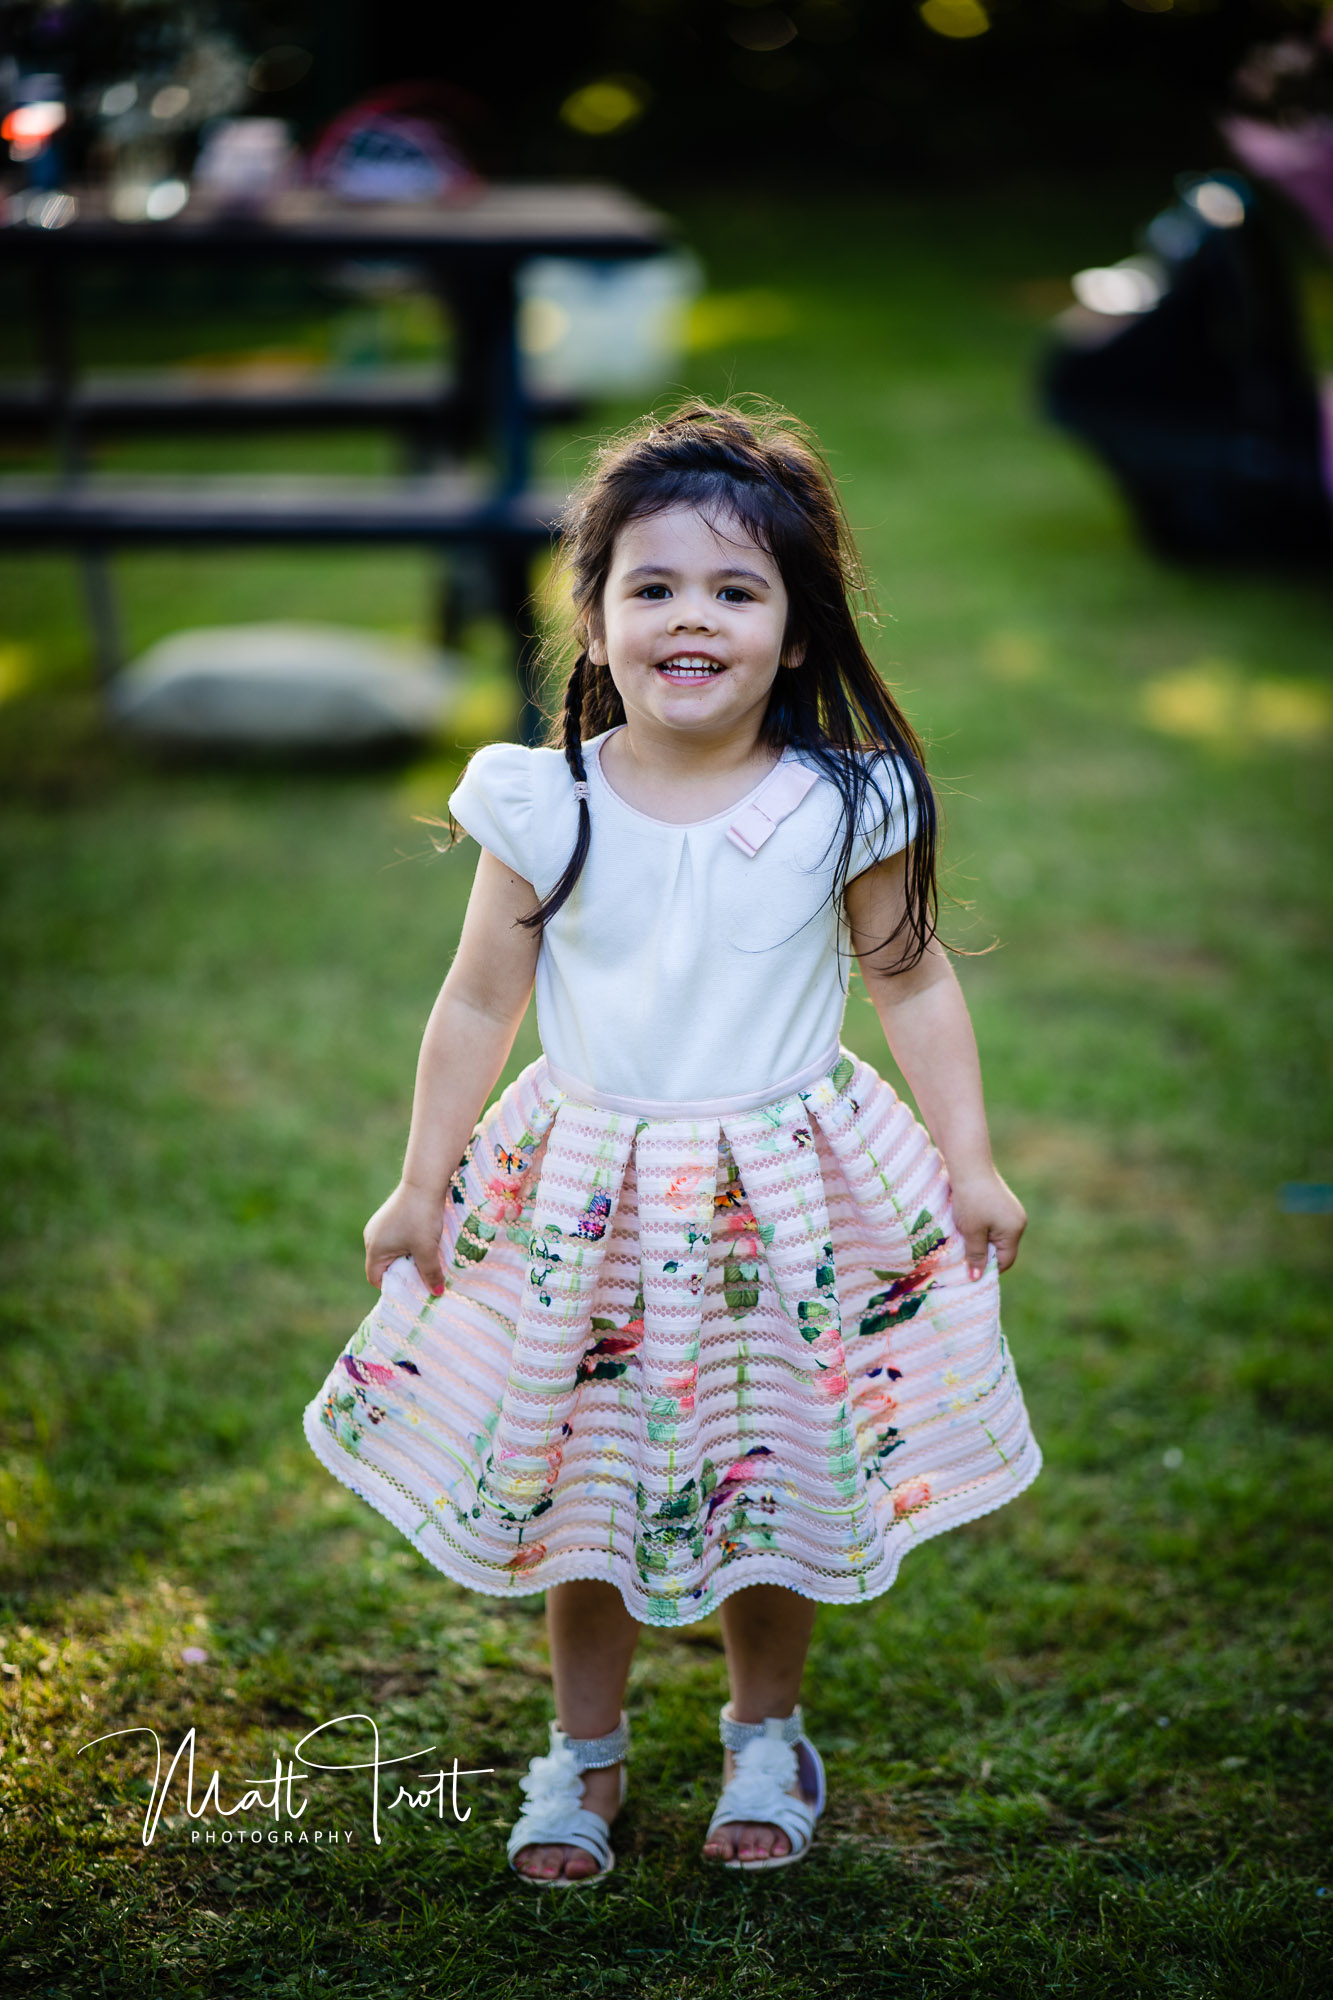 Cute little girl smiling at the camera in a frilly dress